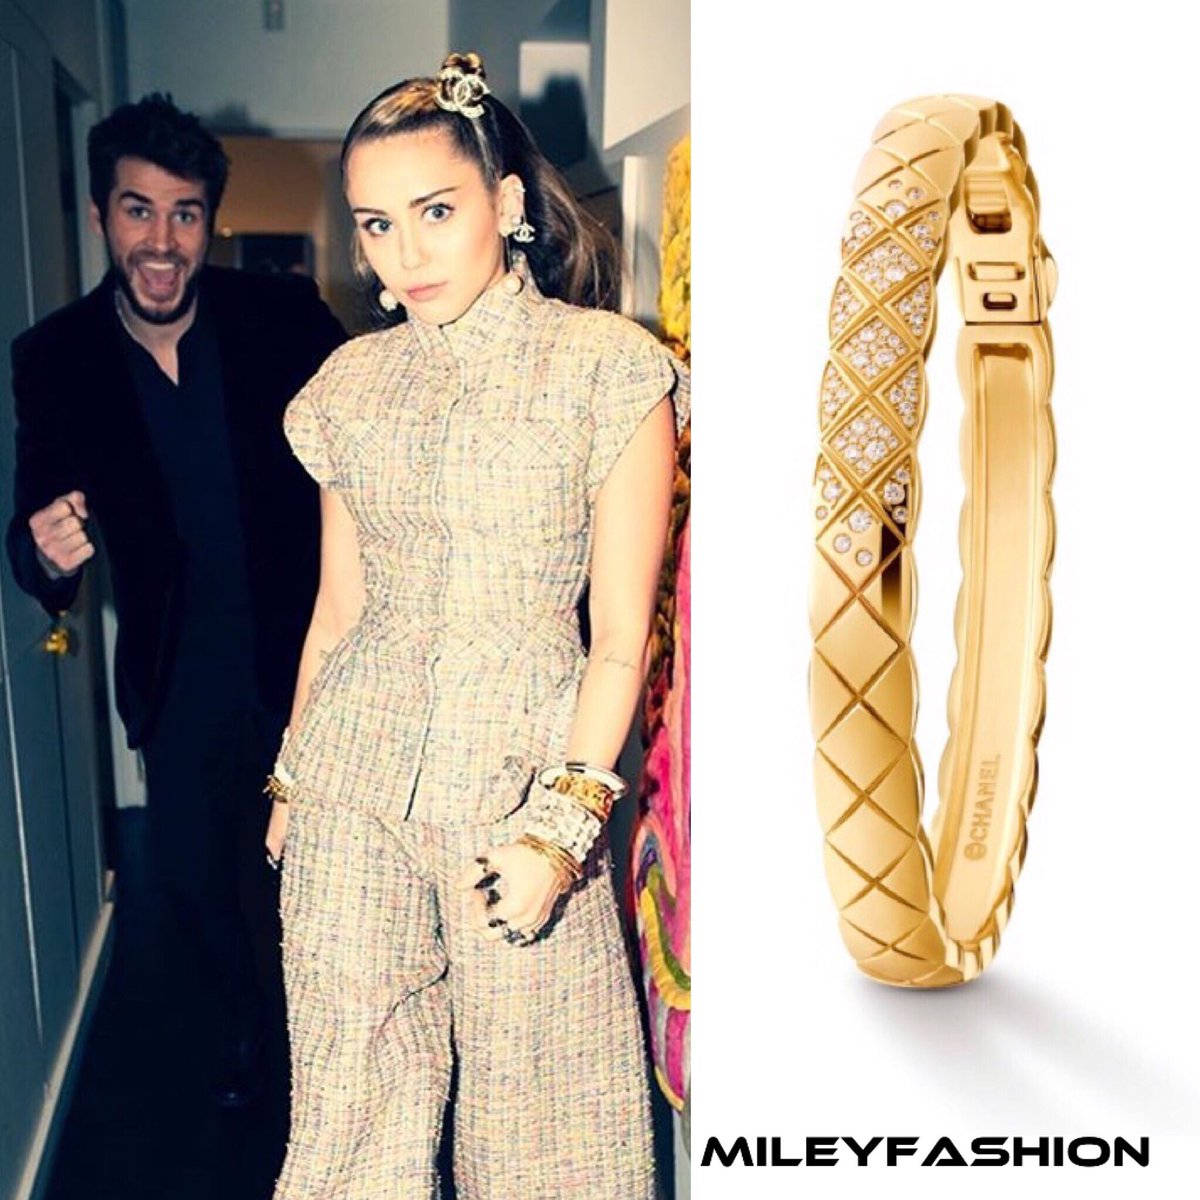 Miley Cyrus Fashion on X: {Style Guide} @mileycyrus wore Chanel's